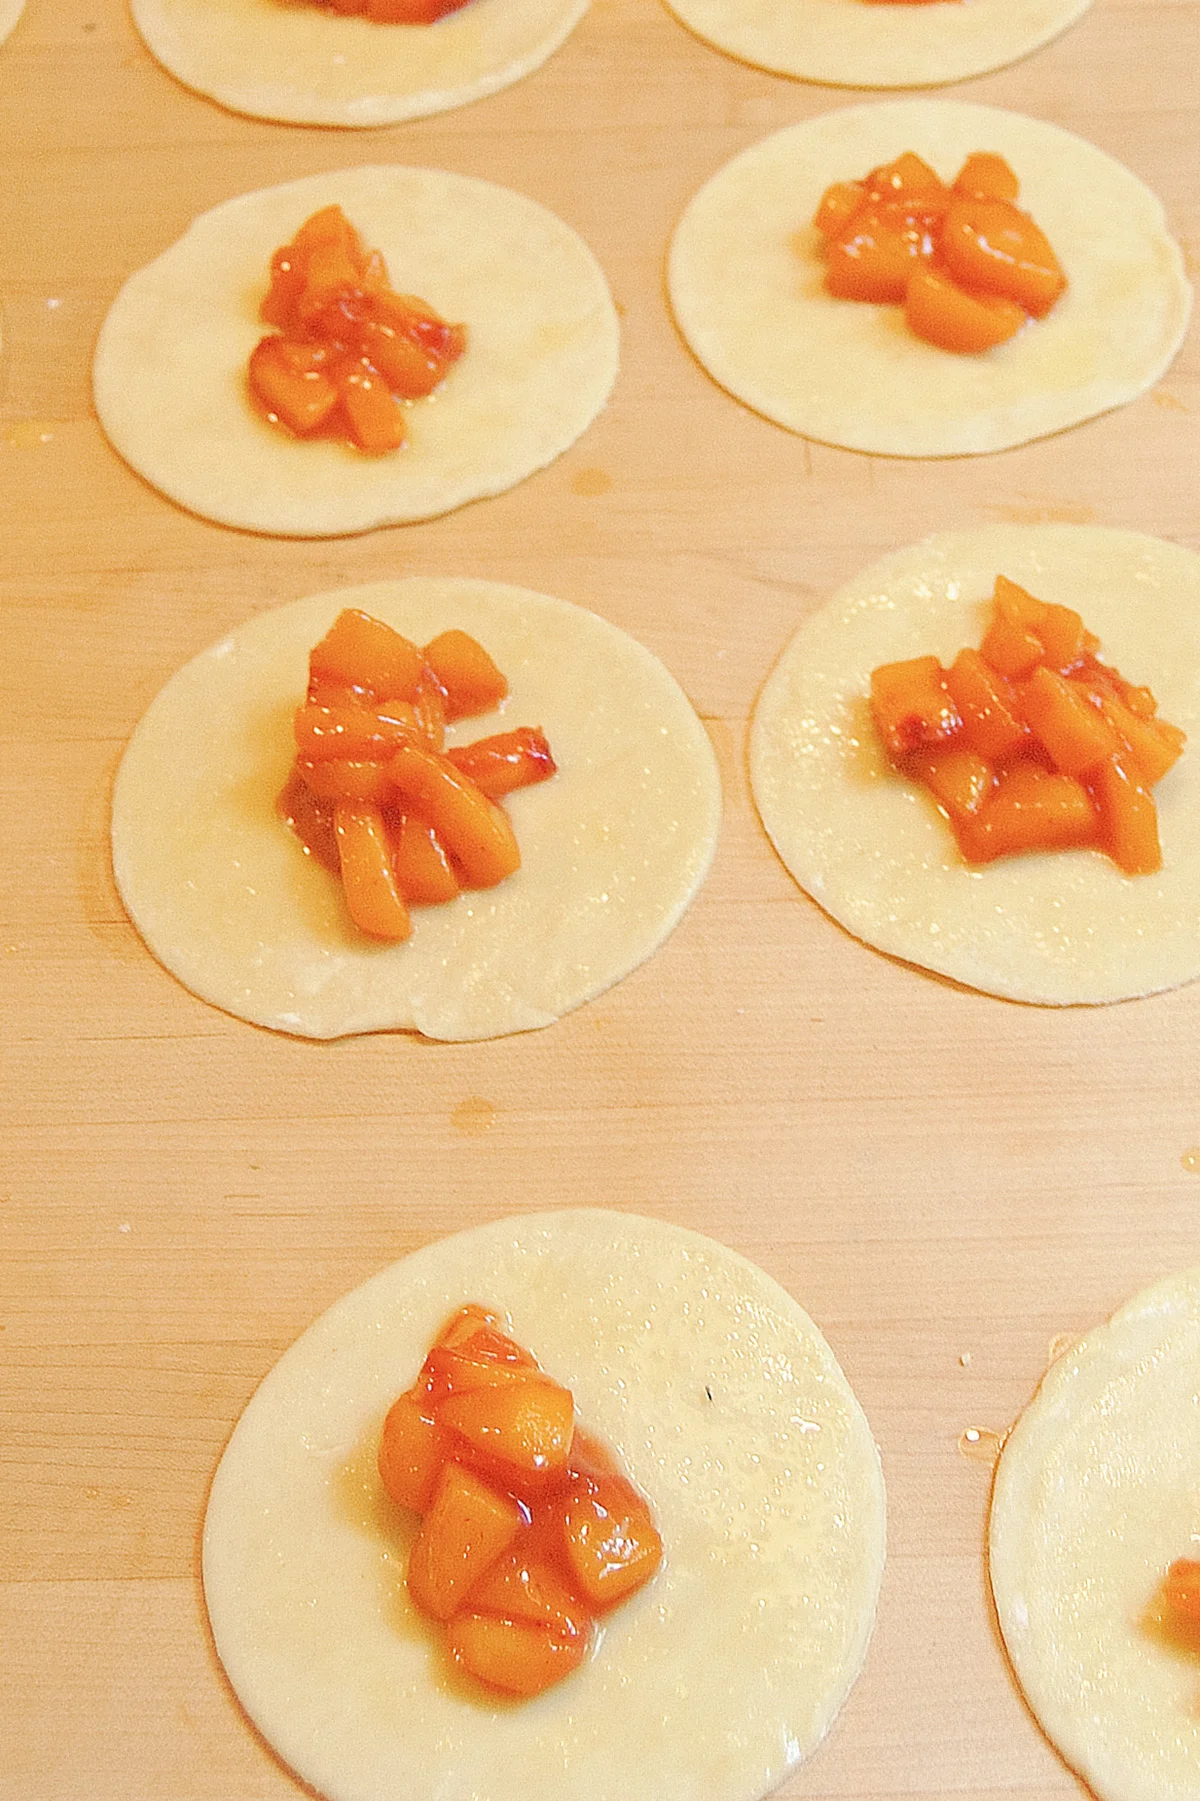 Round of pie dough with dollops of peach filling on a wood surface.